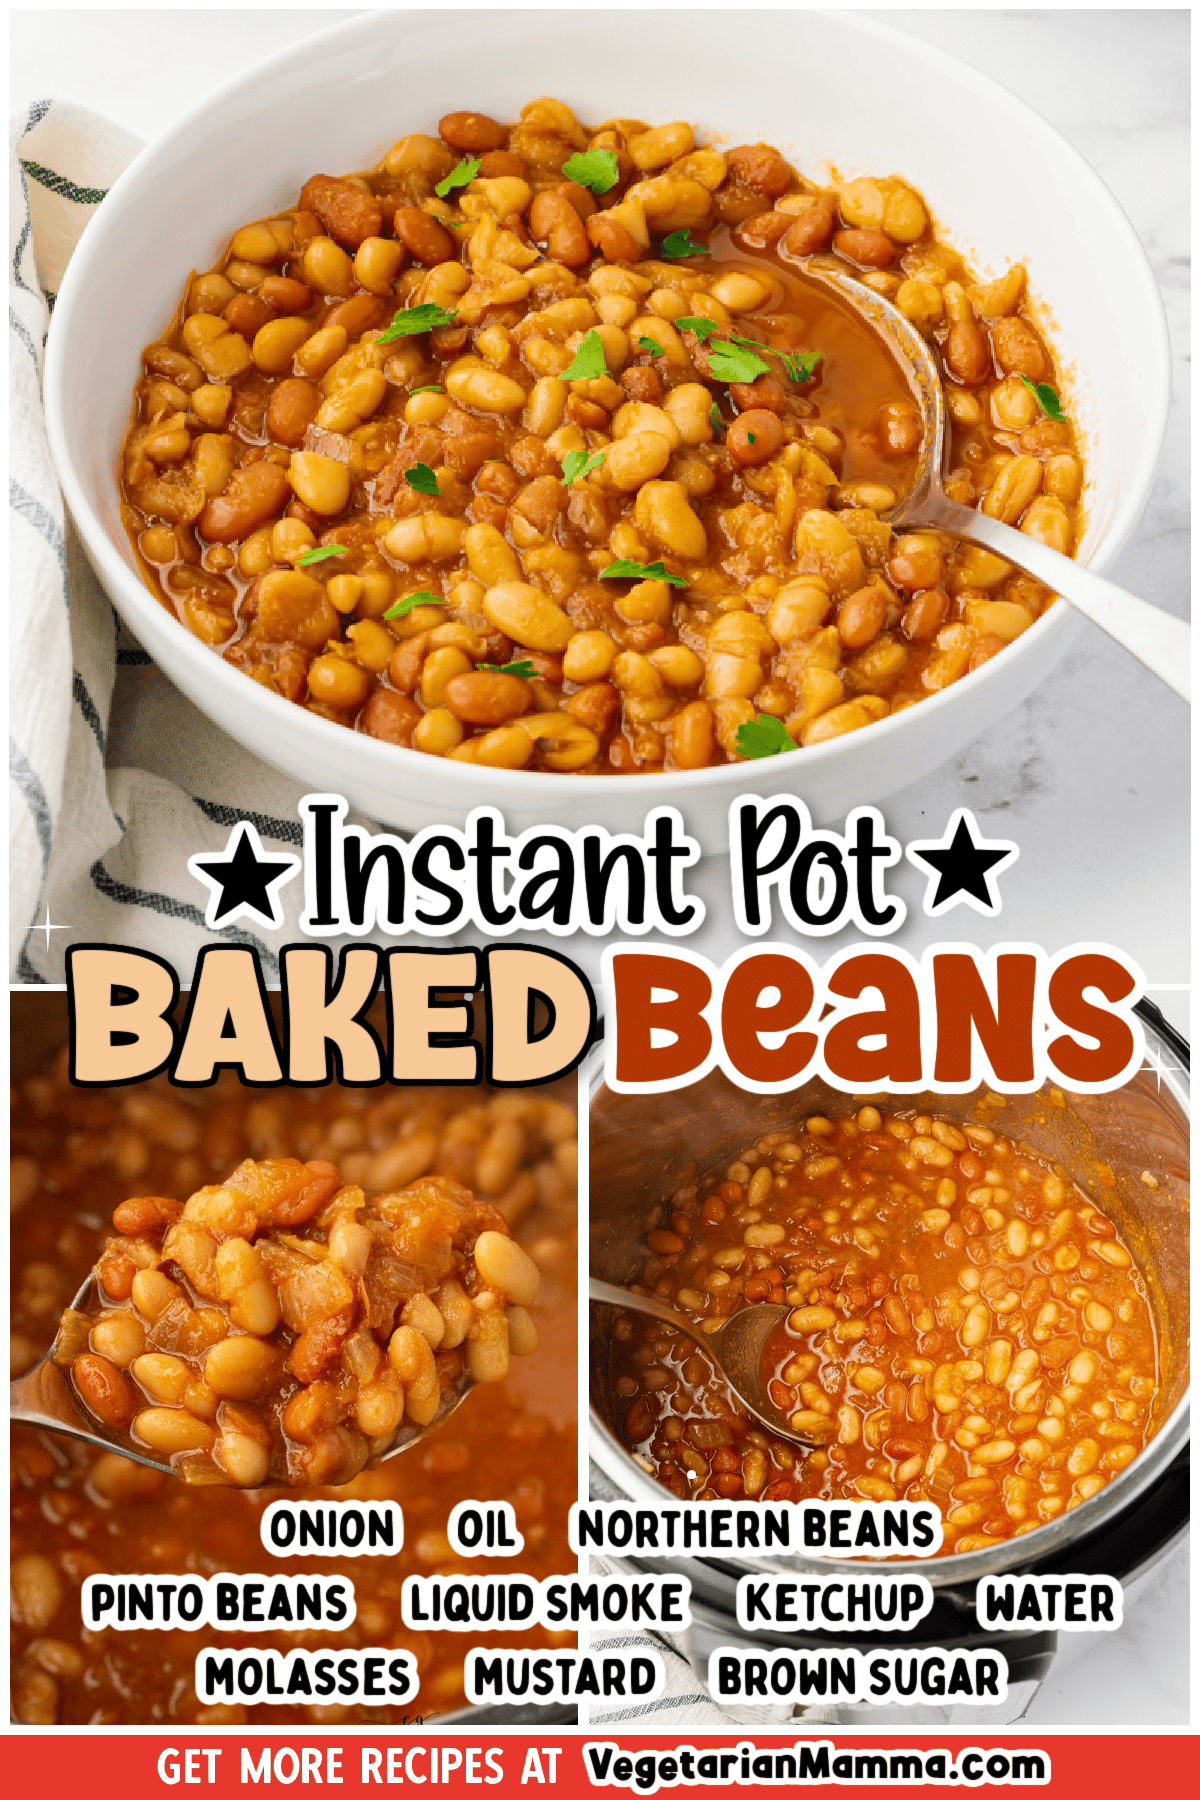 Vertical photo of three images of baked beans. At the top is a white bowl containing baked beans. Bottom left is a close up image of beans on a spoon. Bottom right is a close up of beans in a pan. Text overlay says instant pot baked beans. The ingredients are listed underneath